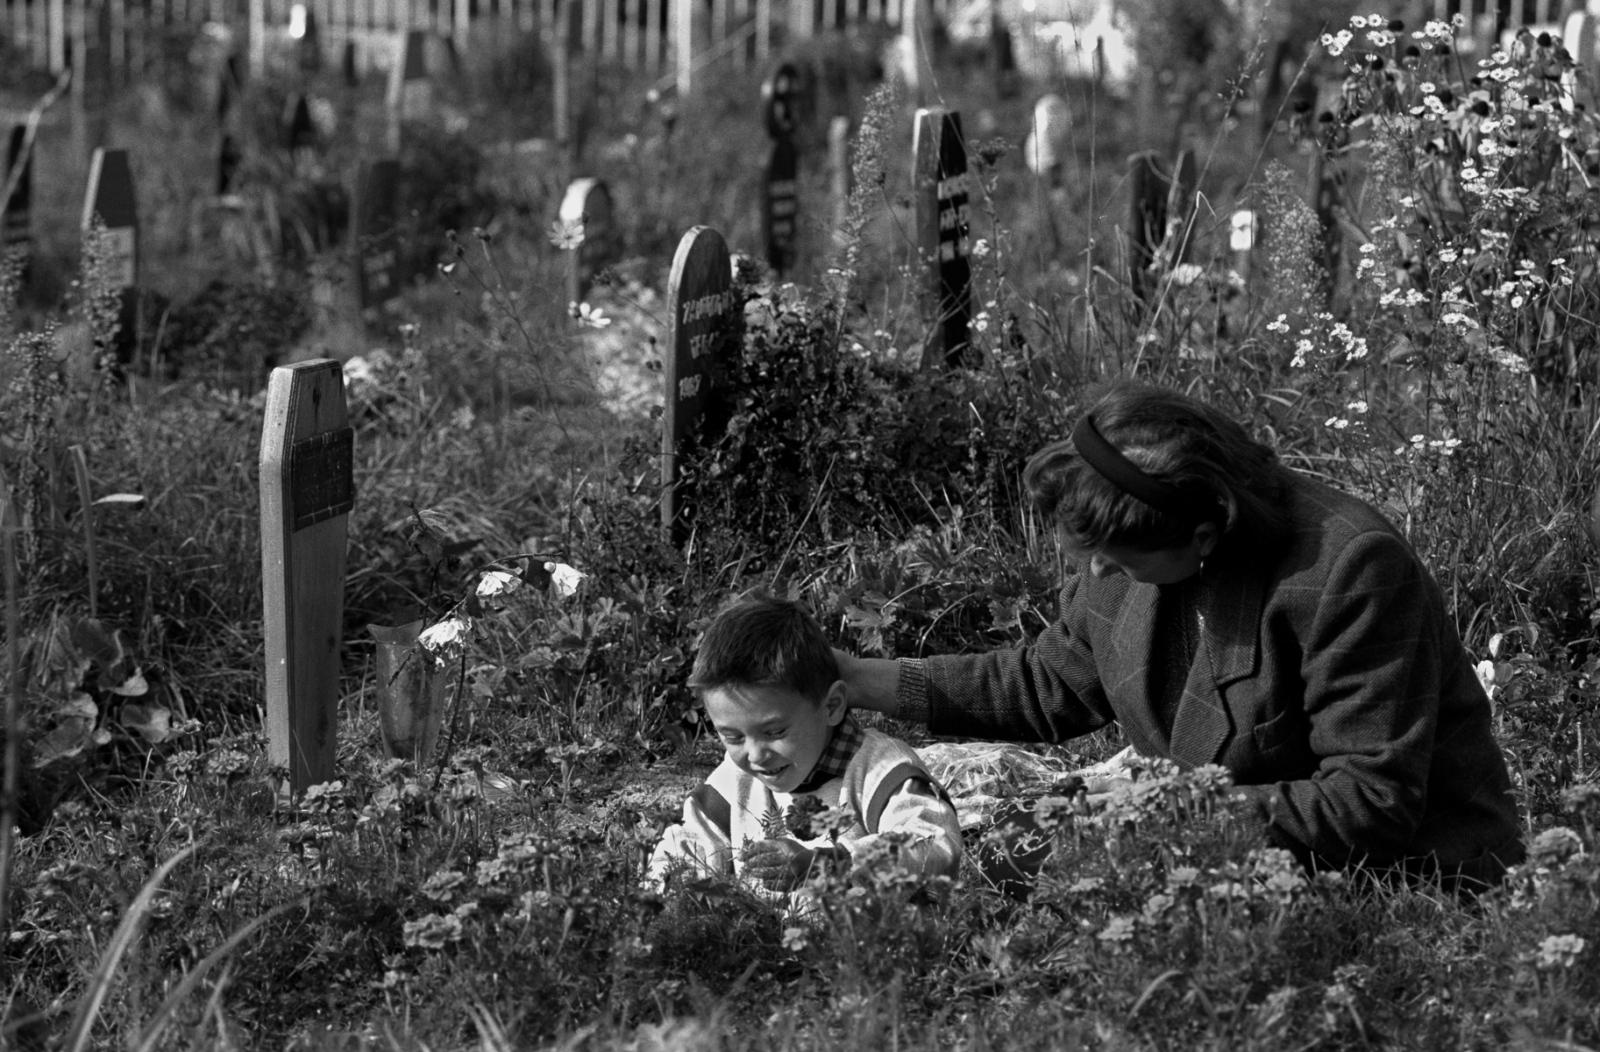 At the risk of getting killed by sniper fire a mother comforts her son as they visit the grave of a loved one. During the war in the former...